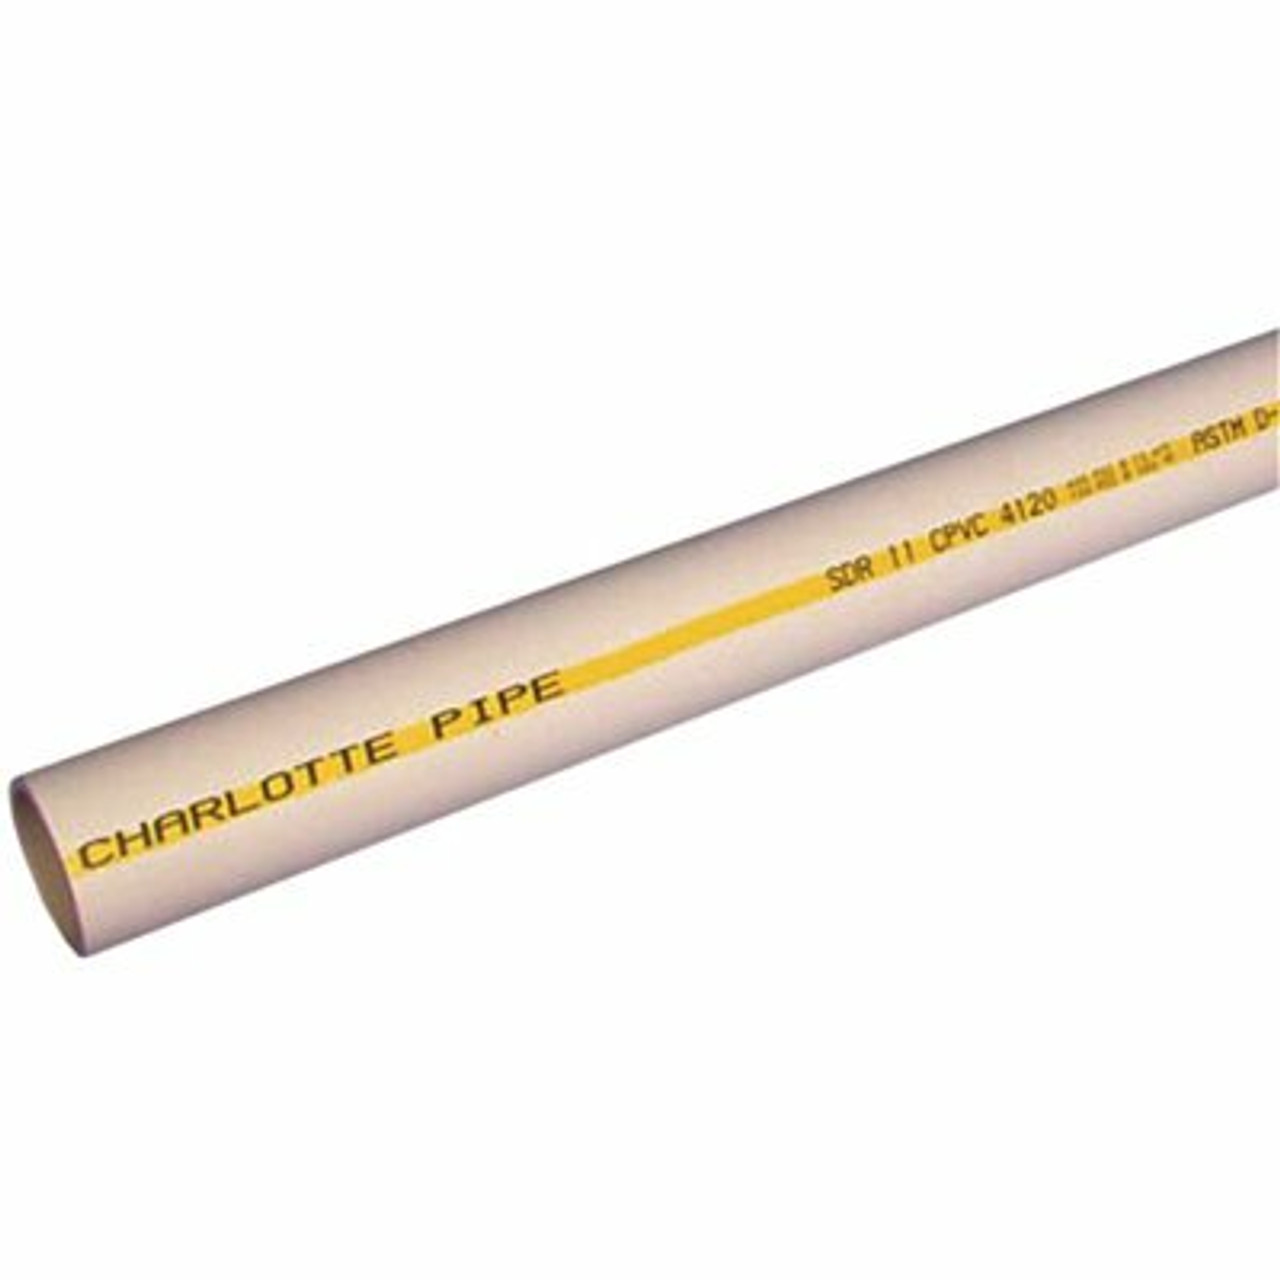 Charlotte Pipe 1 1/4 In. X 20 Ft. Cpvc Sdr11 Flowguard Gold Pipe